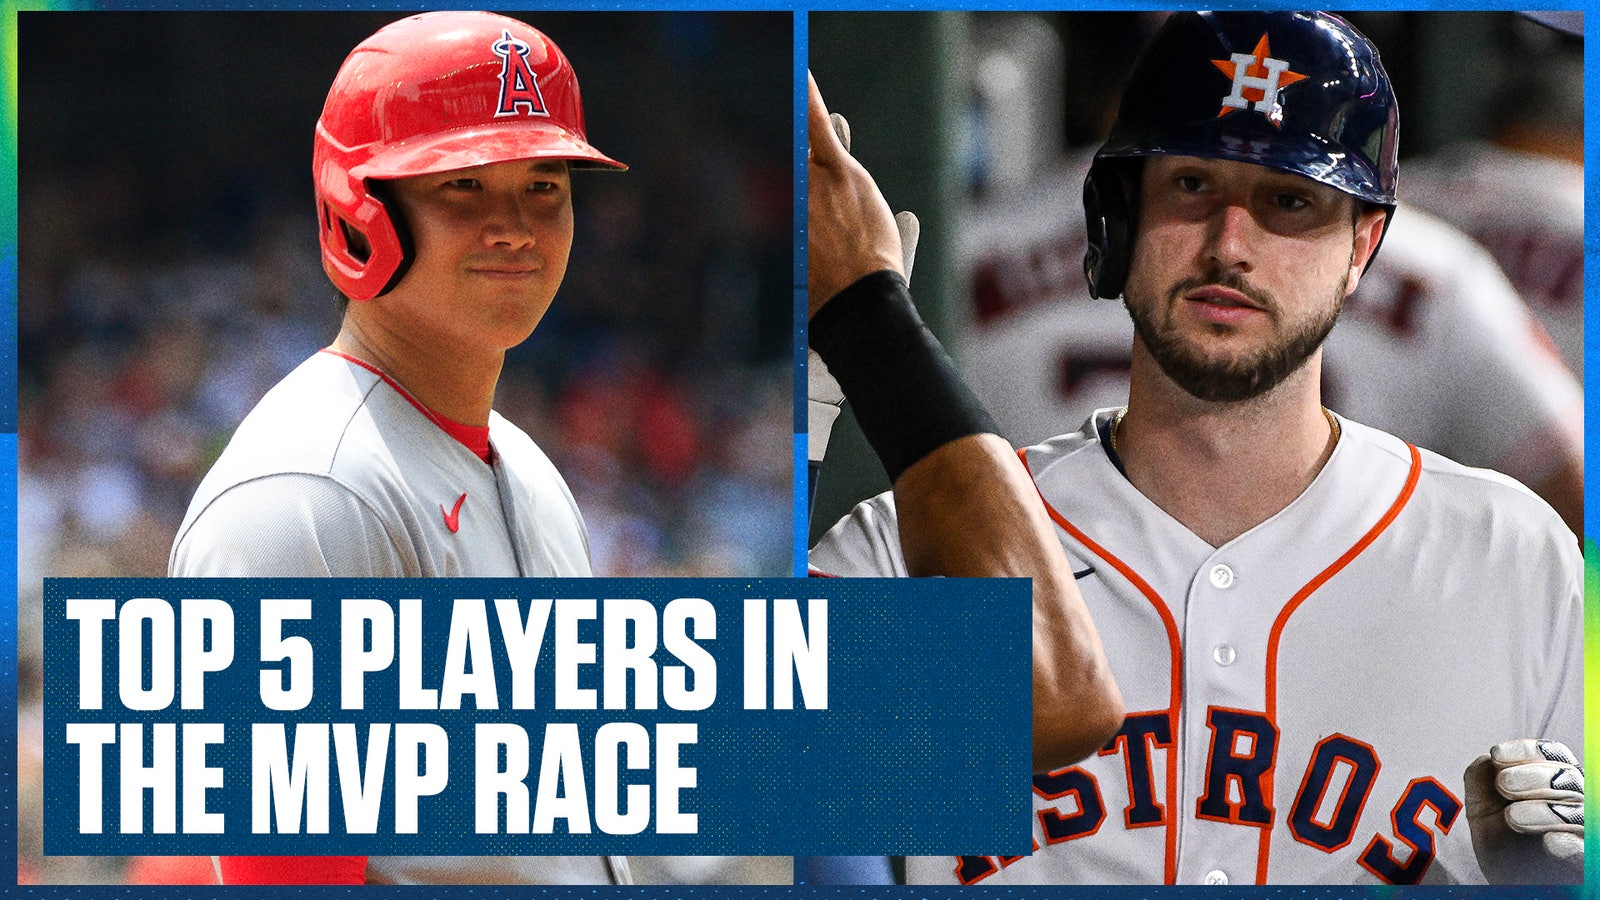 Shohei Ohtani leads the MVP Race, but Astros' Kyle Tucker joins the top five